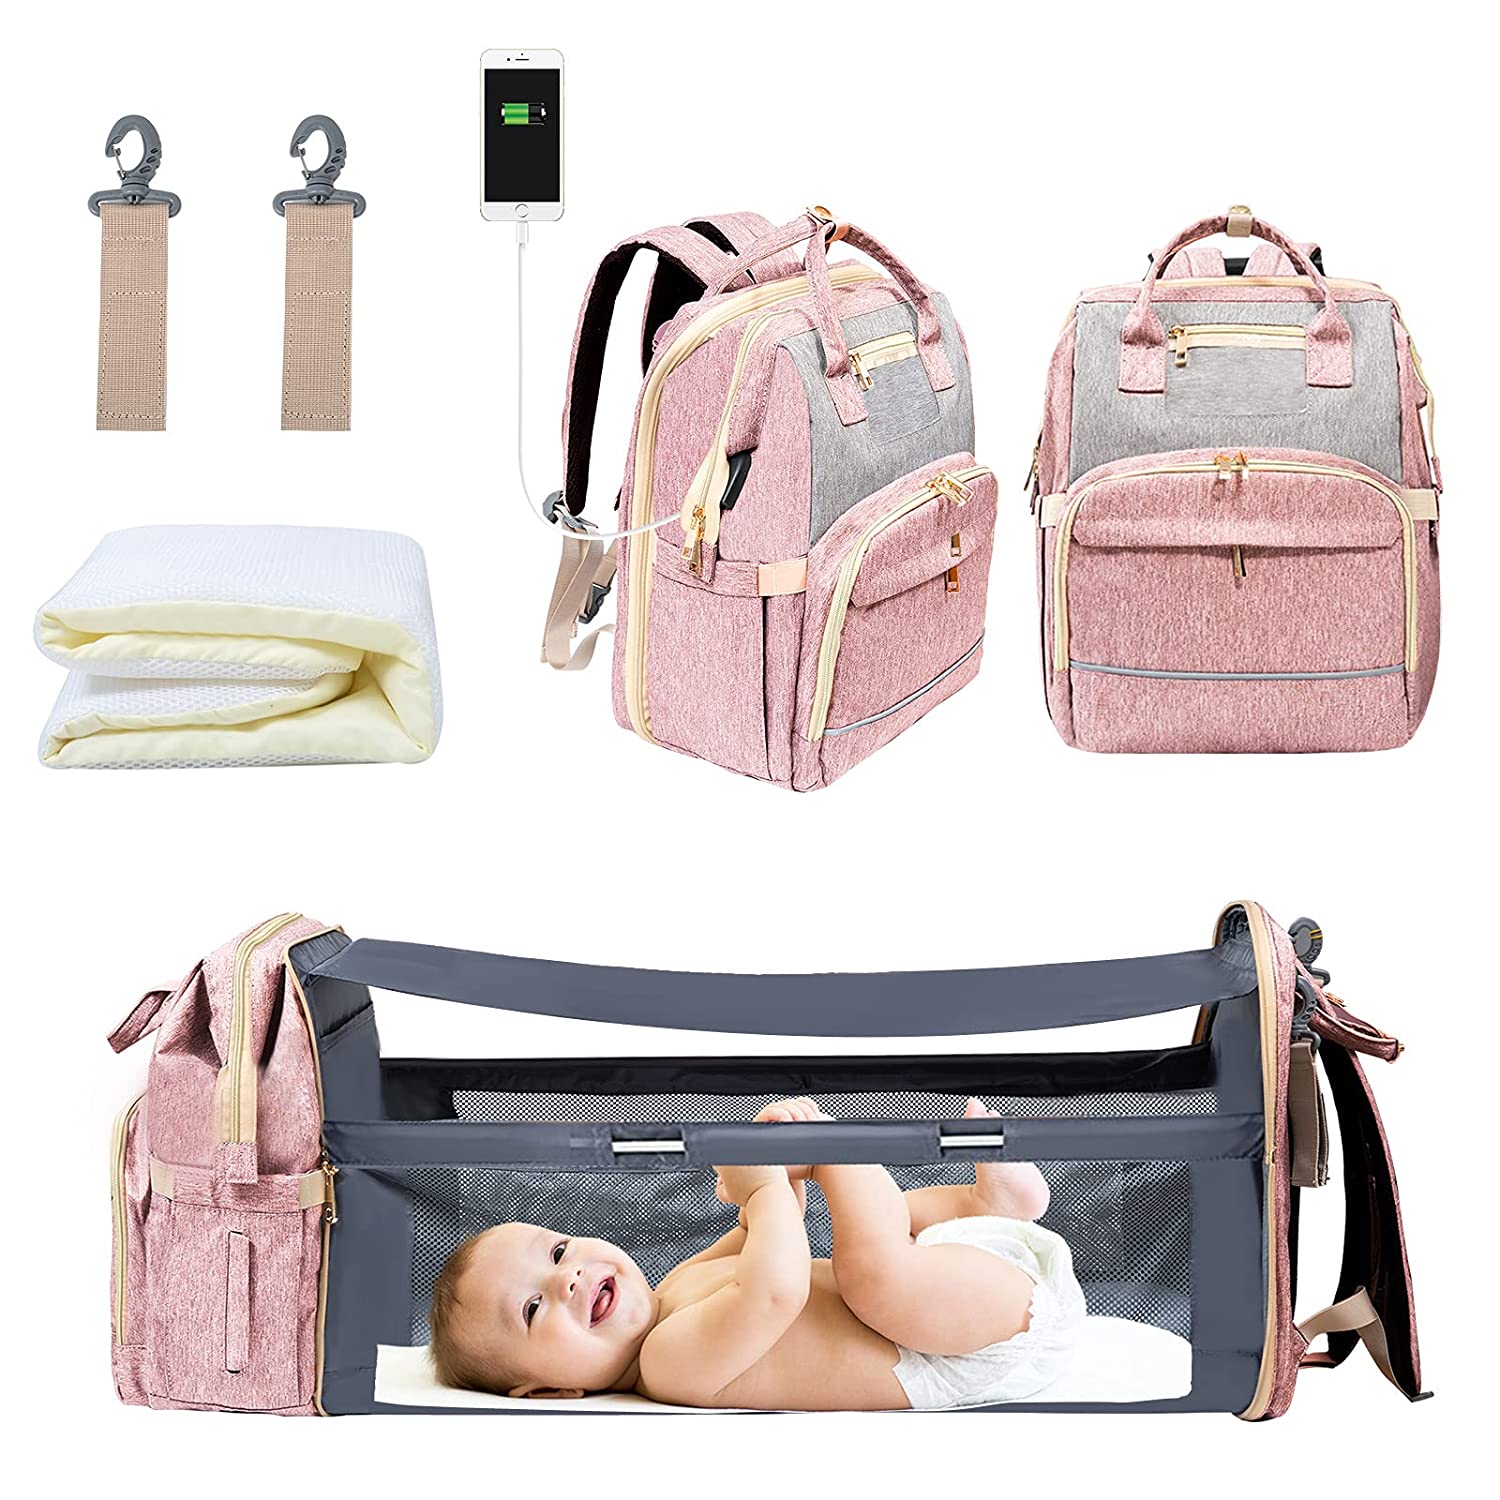 WiseWater Diaper Bag Backpack with Changing Station, USB Charging Port,  Waterproof Mommy Bag with Crib Changing Bed, Portable Travel Bassinets for  Baby, Foldable, Pink